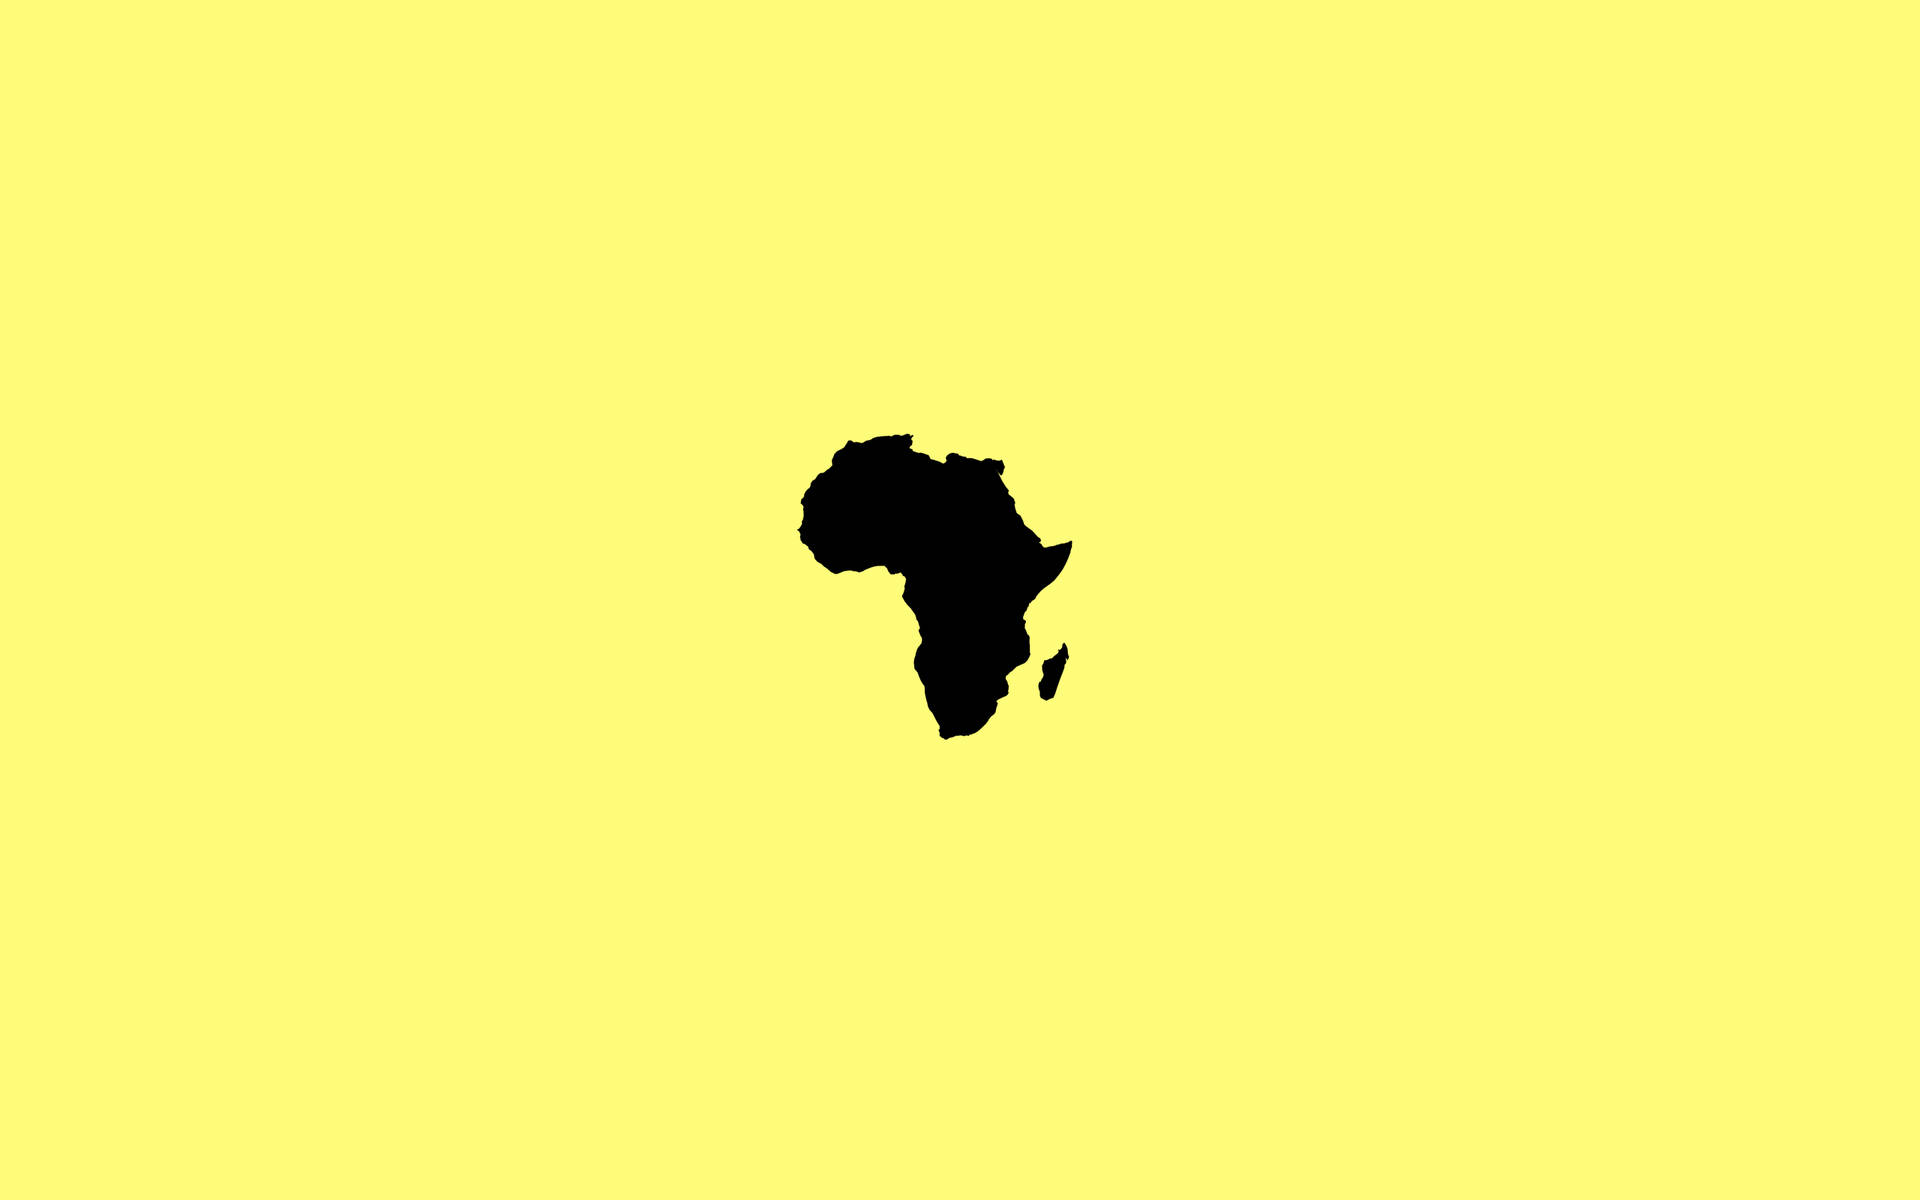 Africa Map On Yellow Background